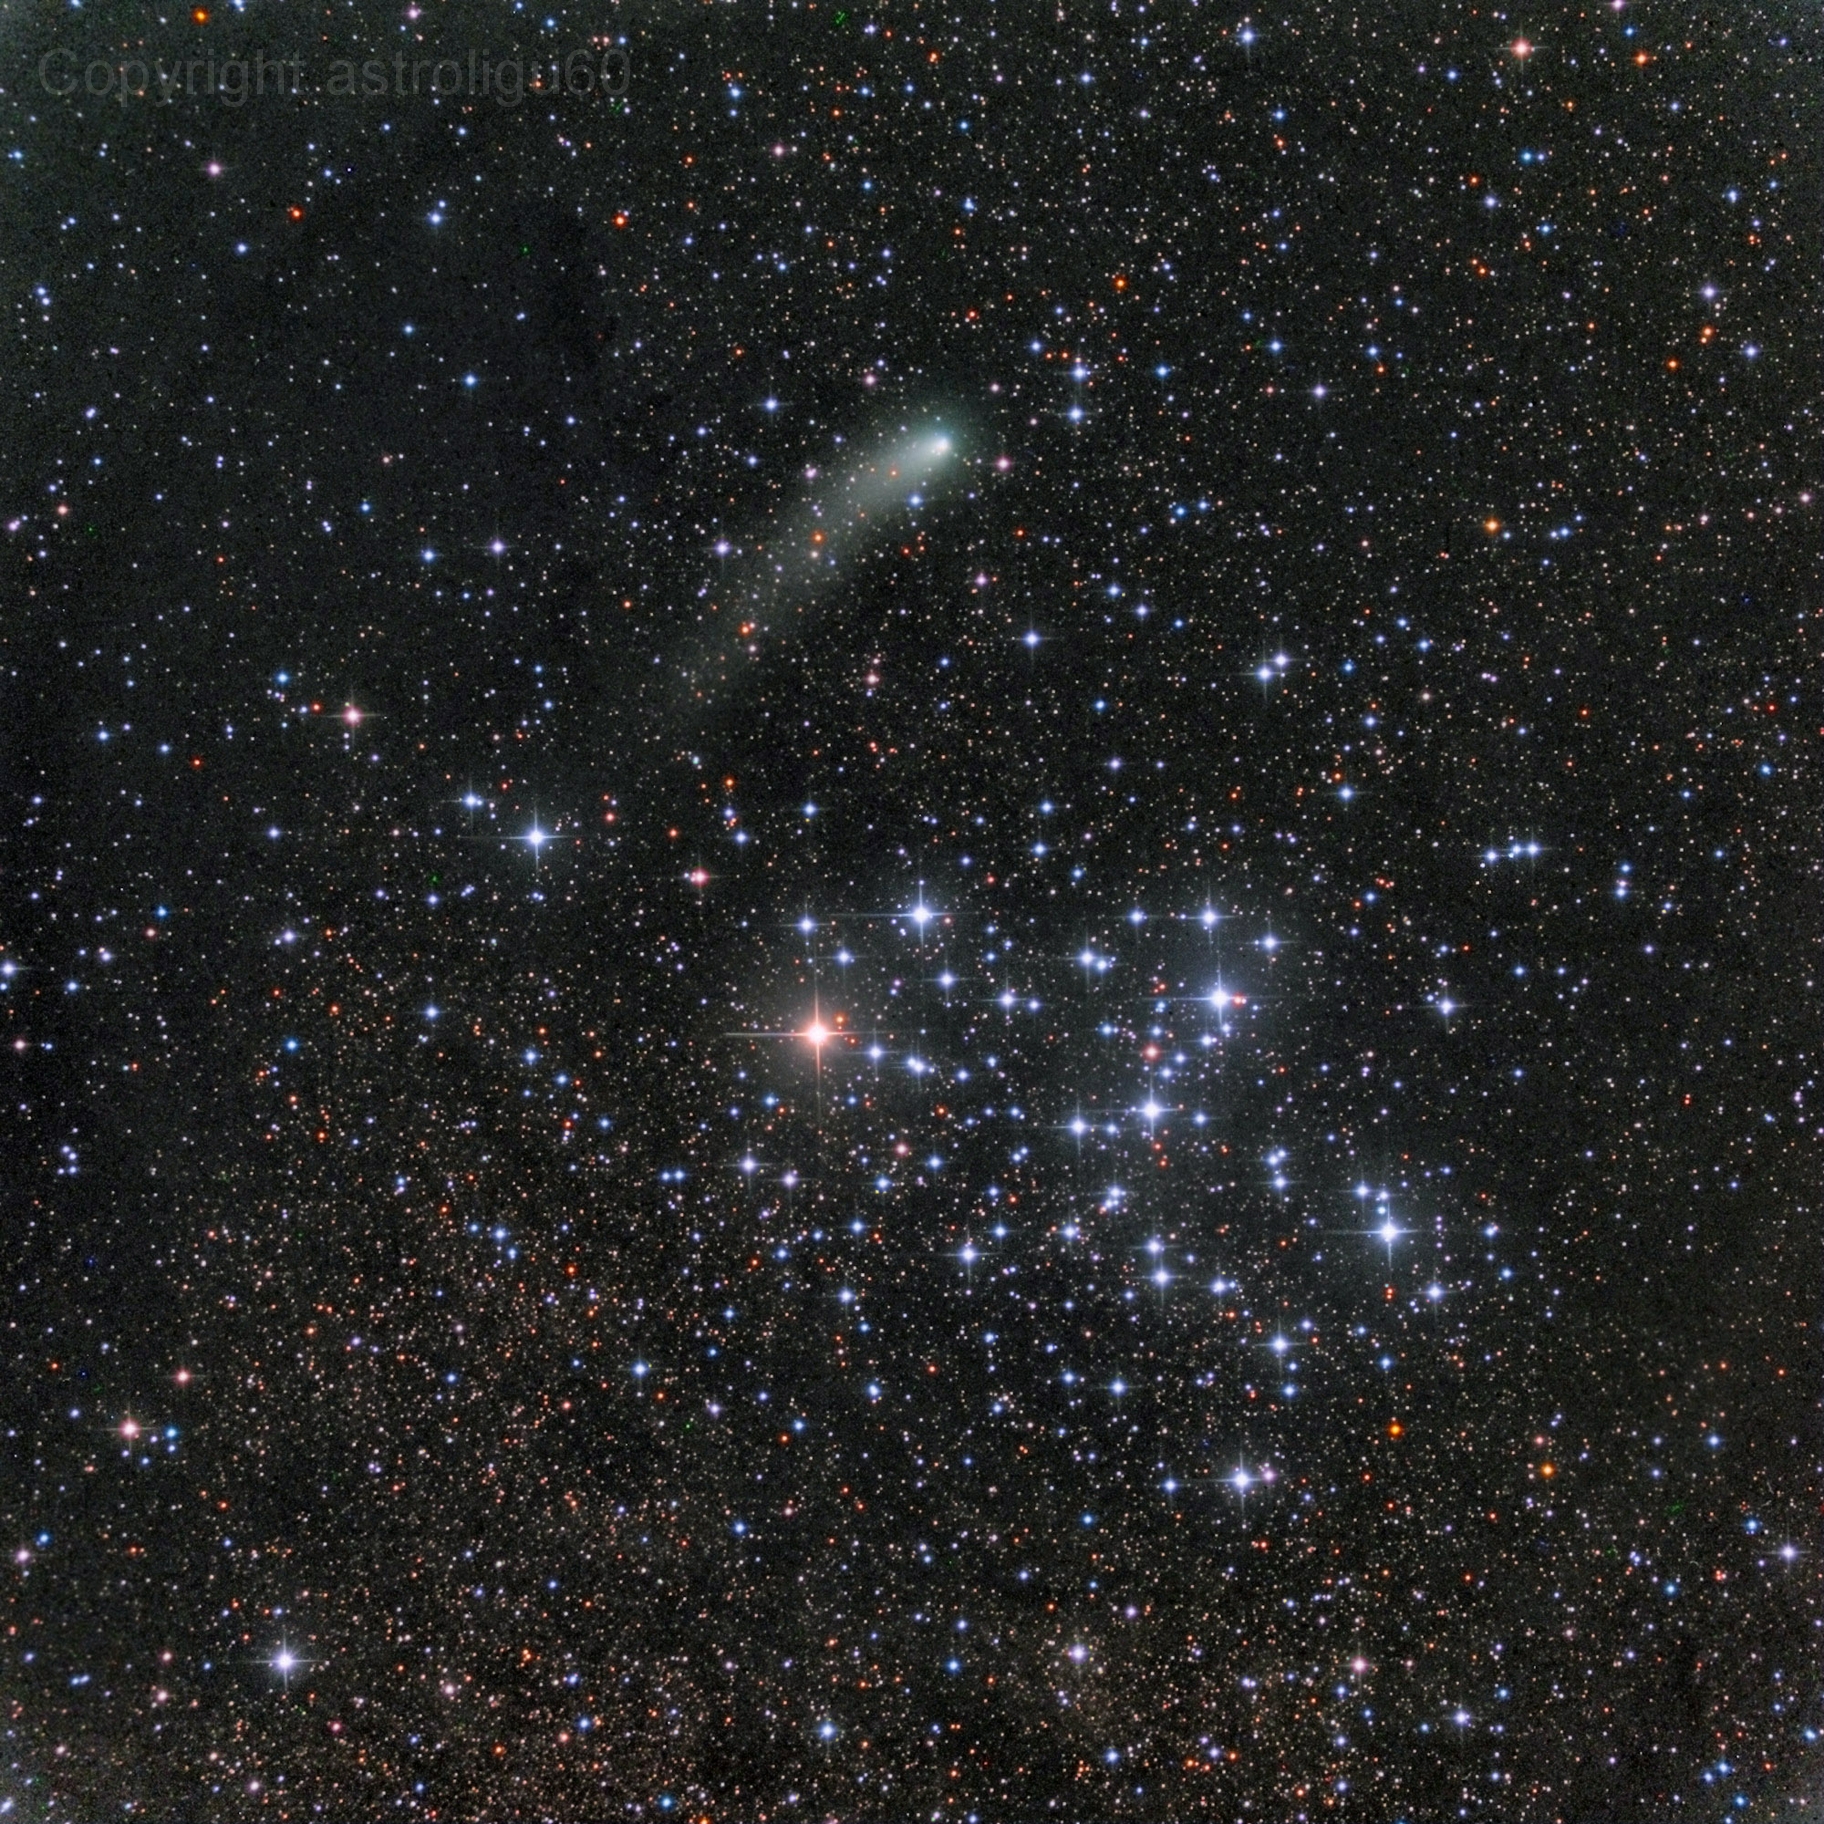 Messier 6 and Comet Siding Spring